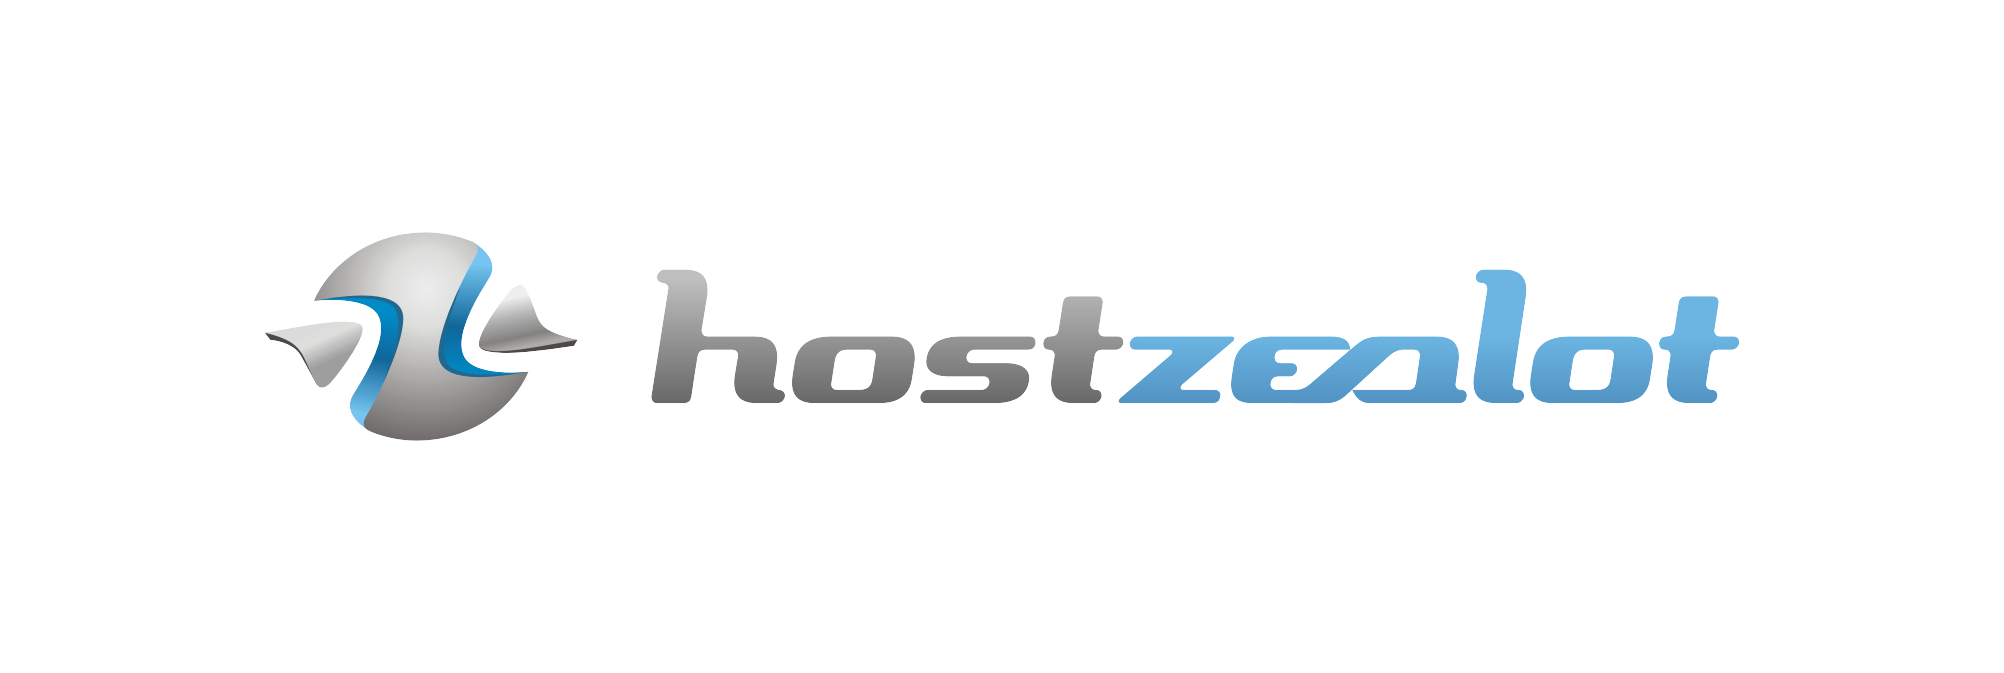 HostZealot VPS with Anonymity Bitcoin payment options